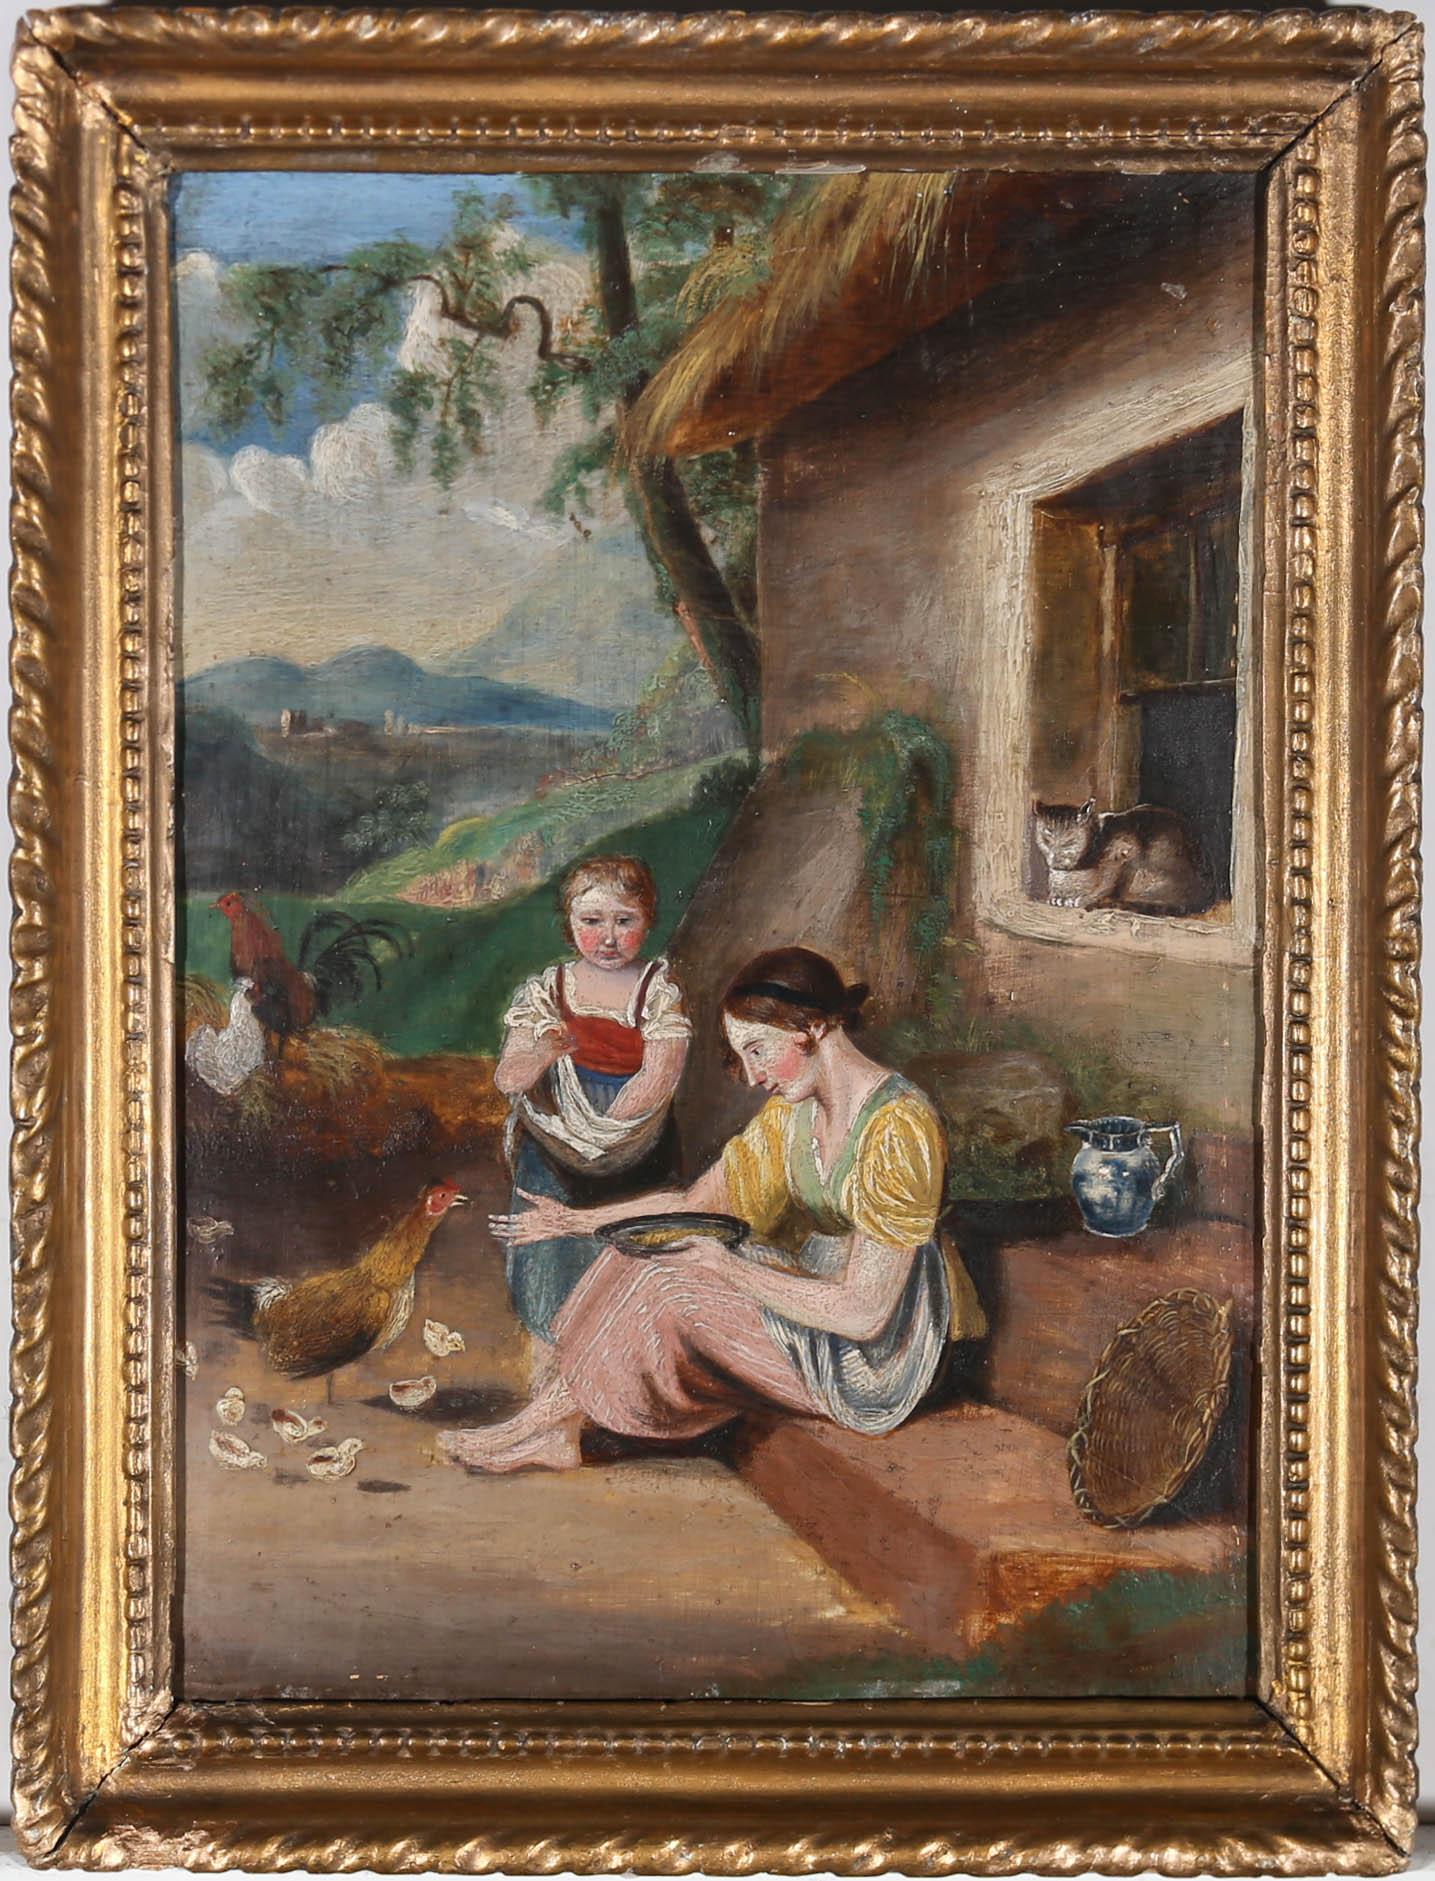 Unknown Landscape Painting - 19th Century Oil - The Rural Life